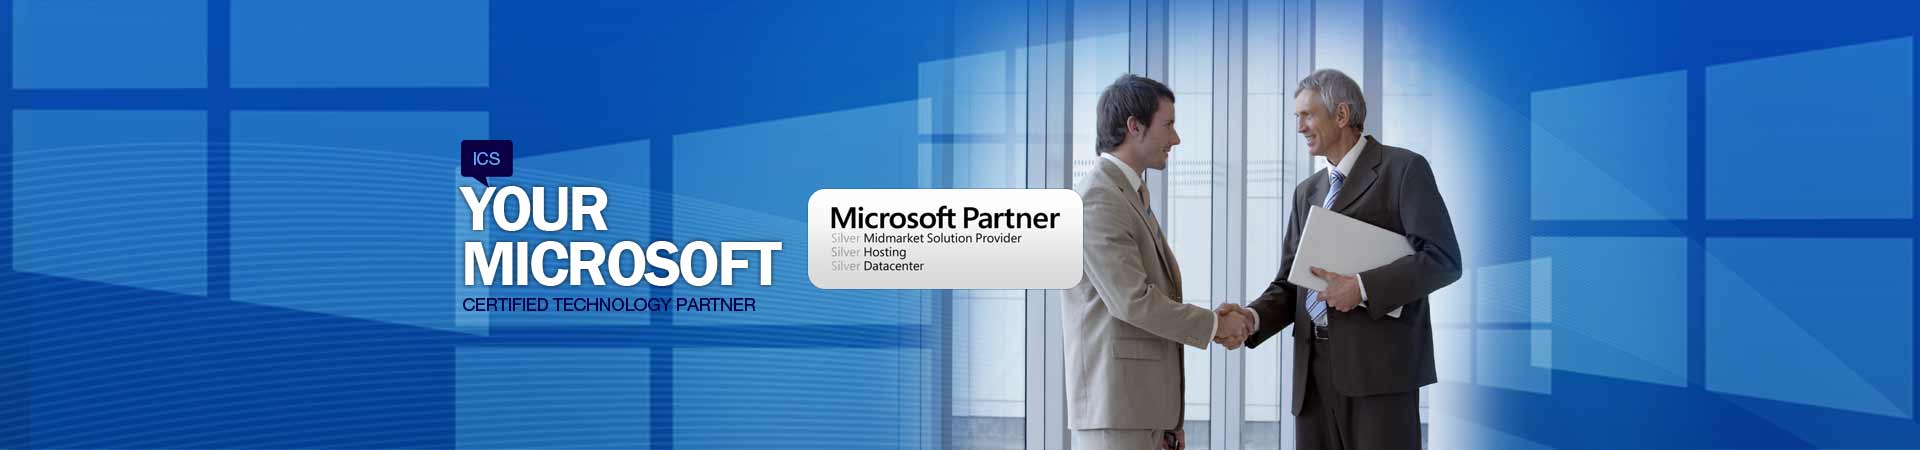 ICSSNJ Your Microsoft Certified Technology Partner